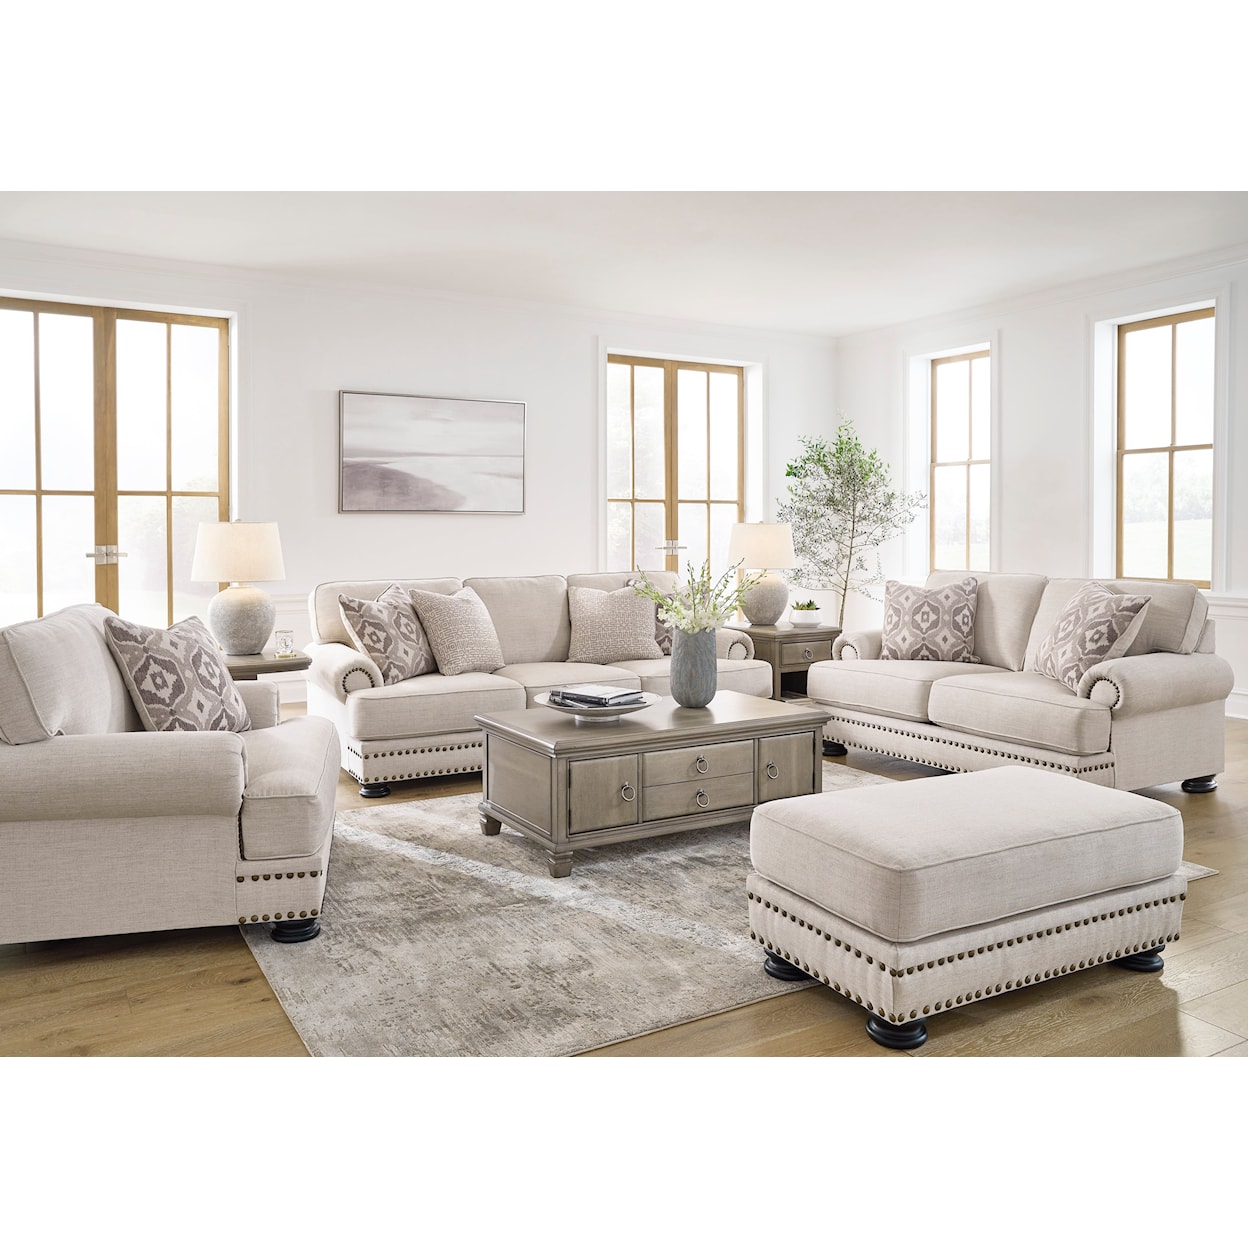 Benchcraft by Ashley Merrimore Living Room Set